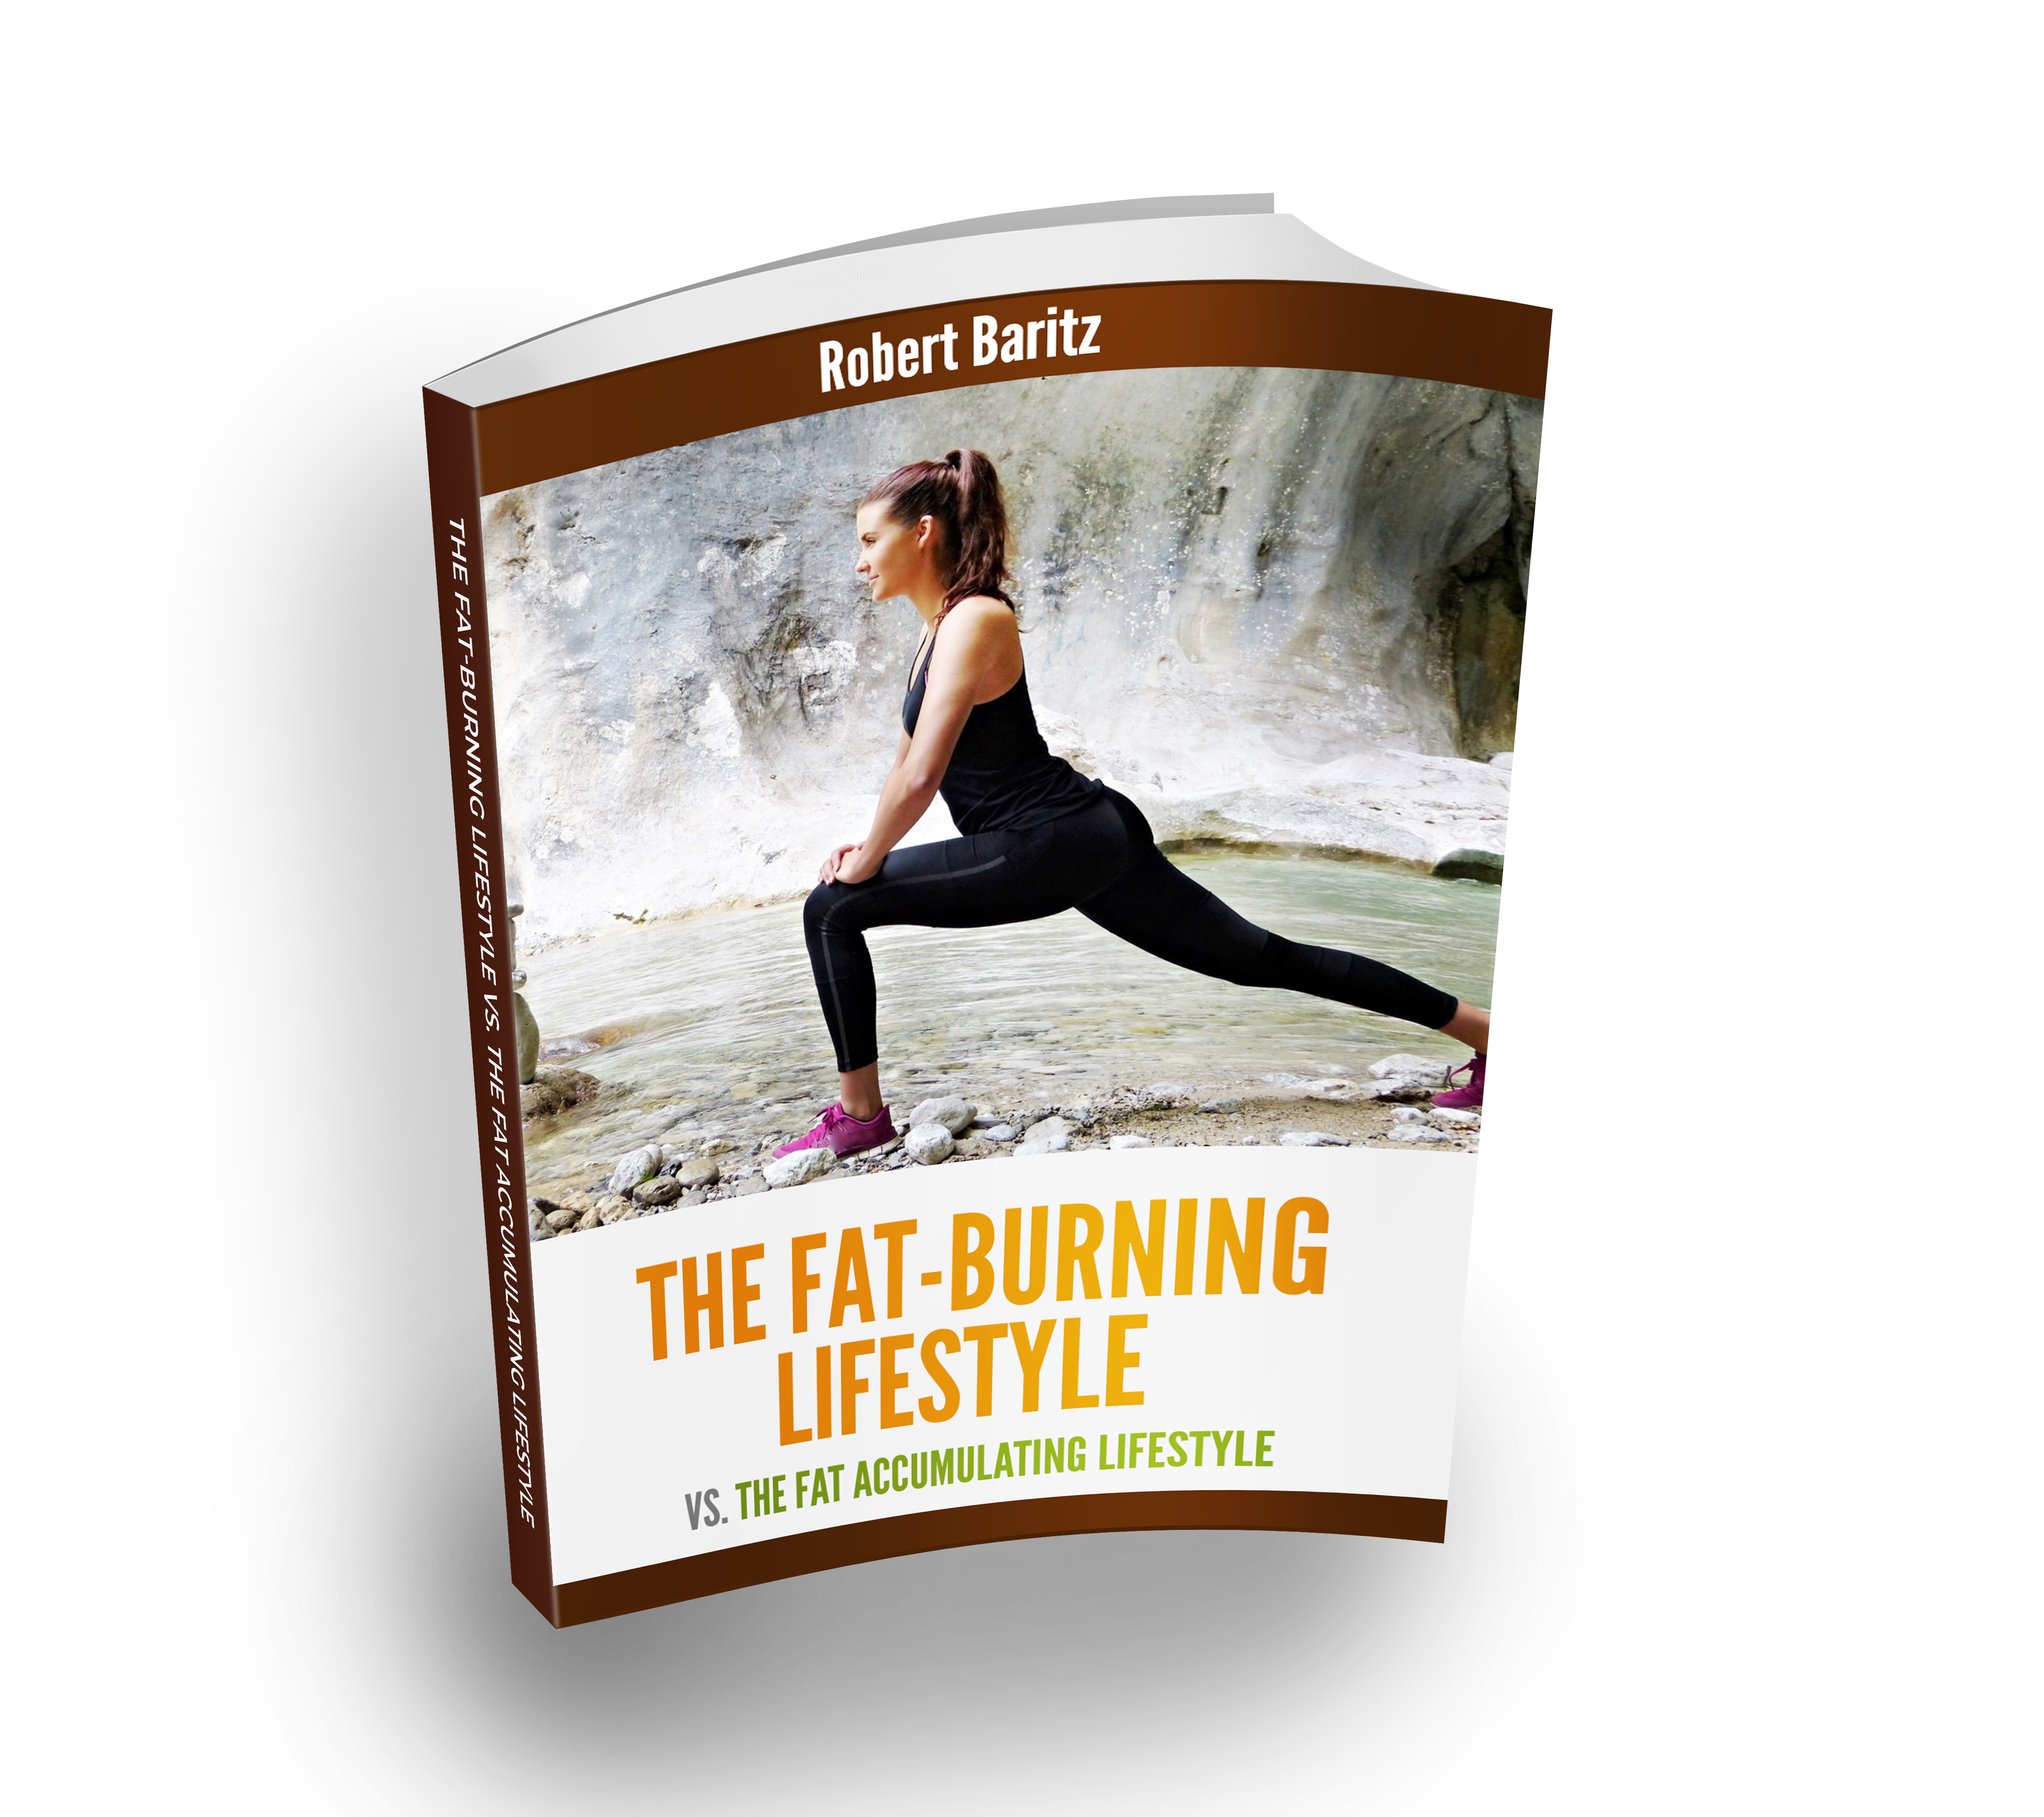 The Fat Burning Lifestyle vs. The Fat Accumulating Lifestyle BOOK